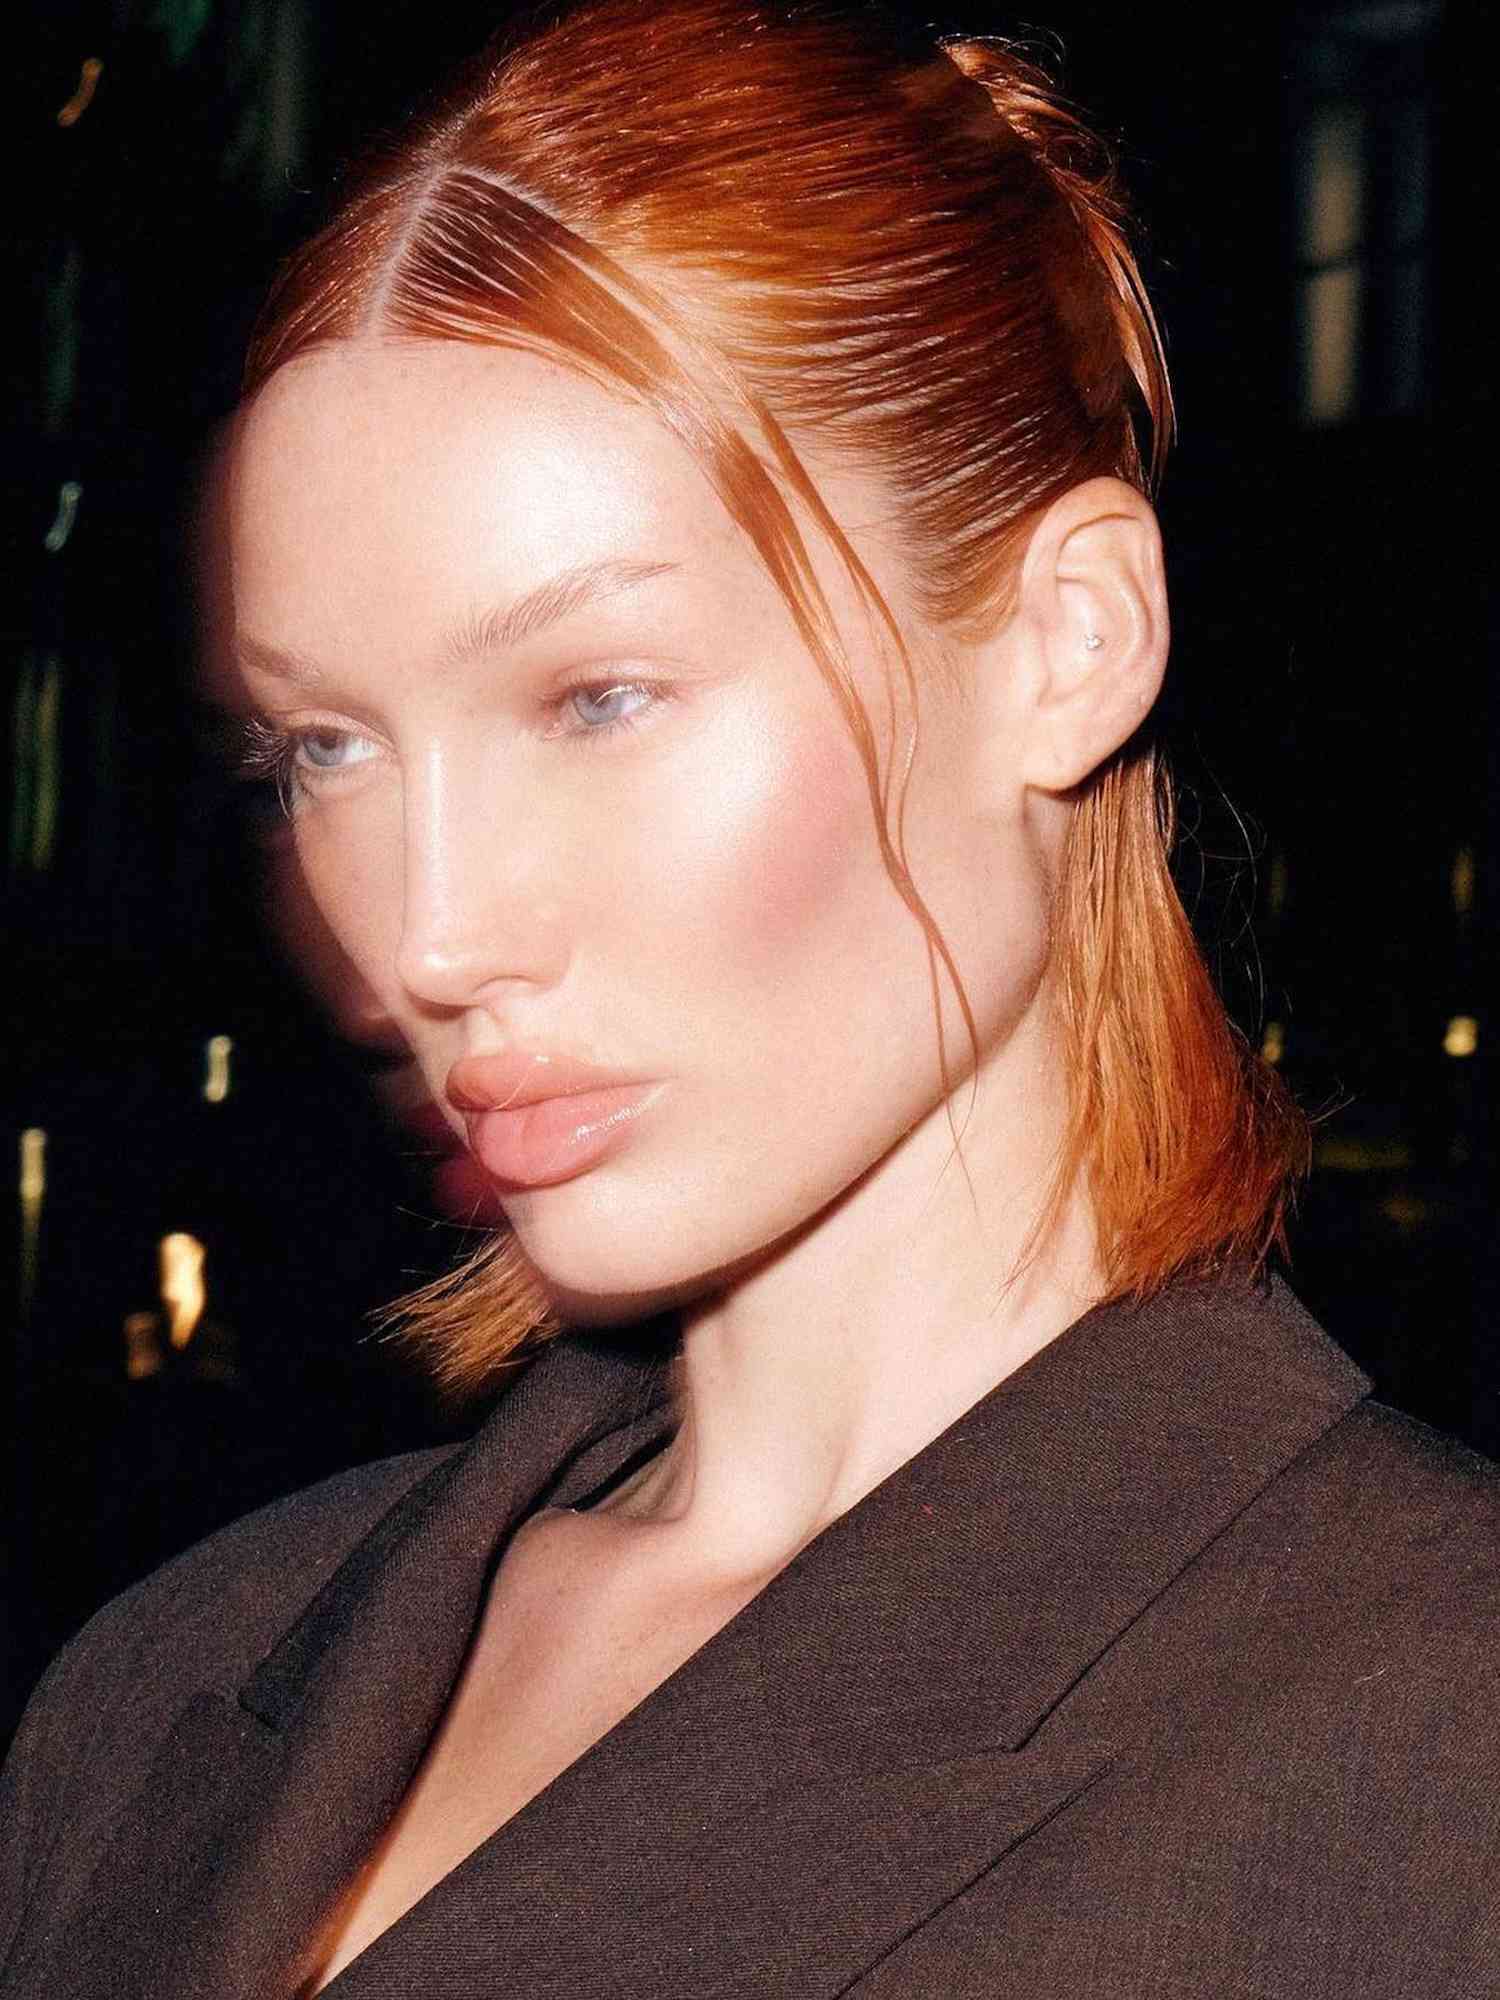 Meredith Duxbury with a ginger long bob hairstyle with wet-look half-up style